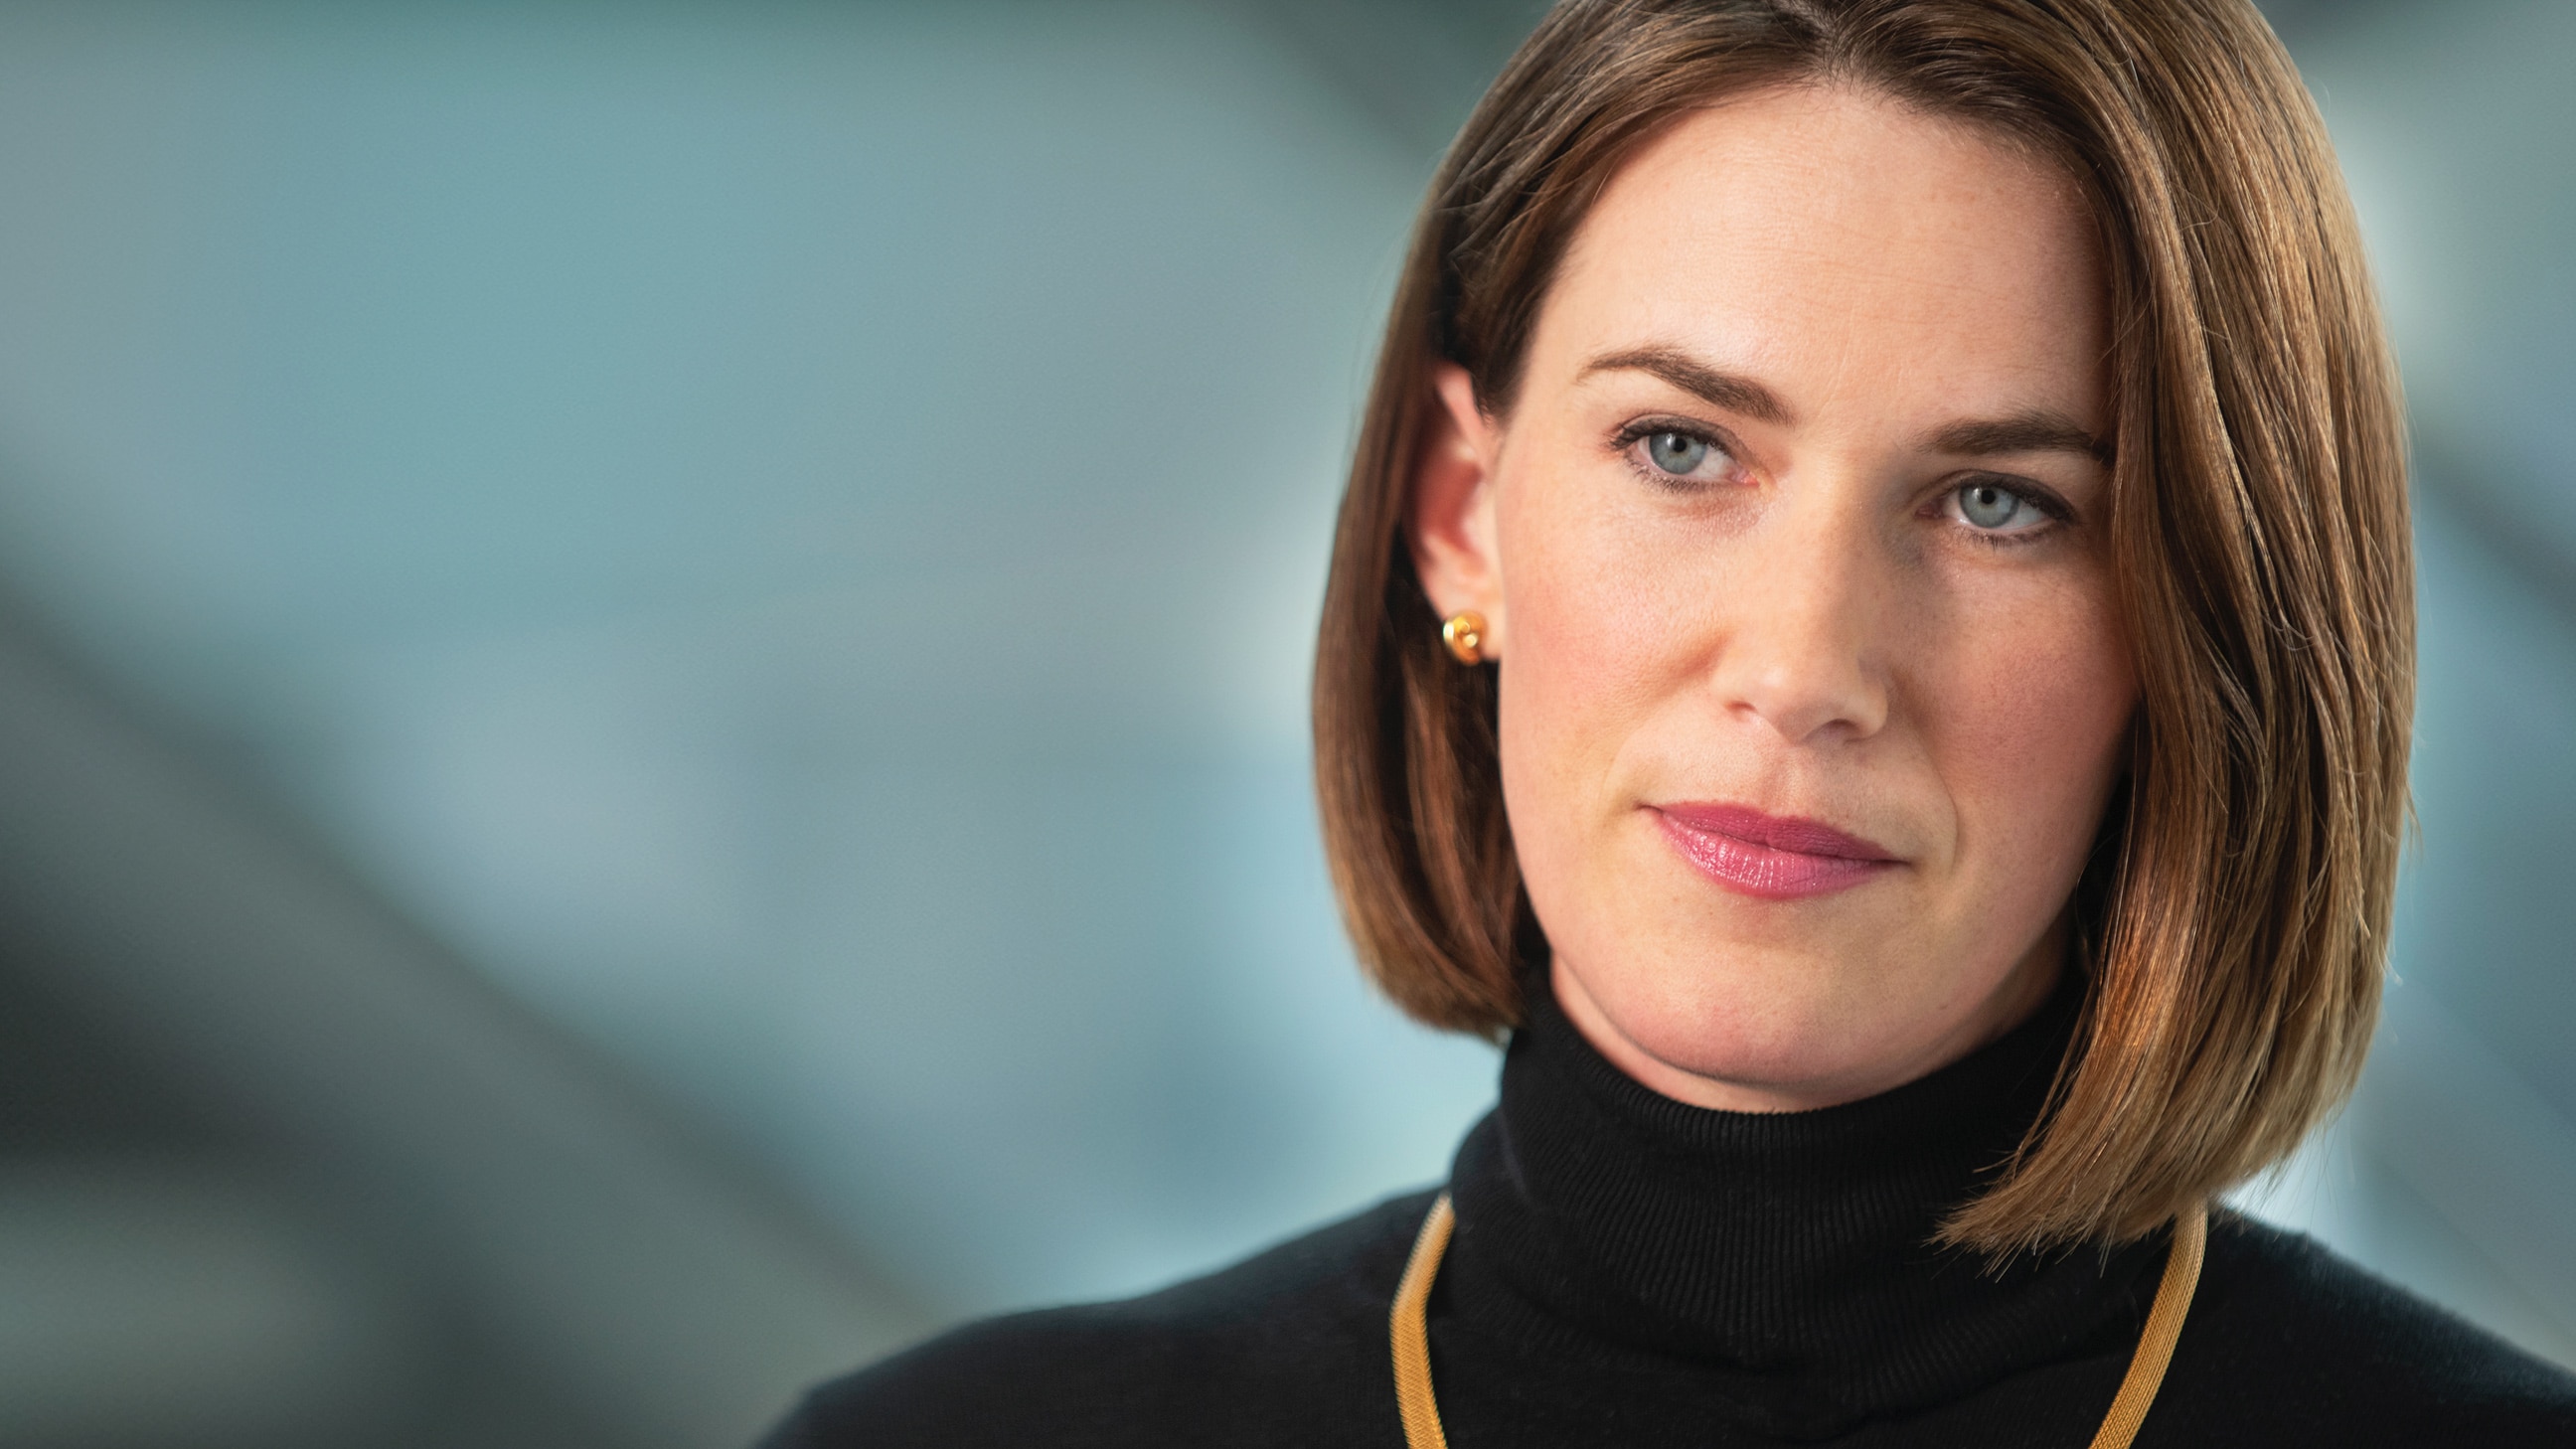 Kaitlin Caughlin, Vanguard's global head of investment management and finance risk, who is featured in this video with Joe Davis, head of Vanguard Investment Strategy Group, on our approach to investment management.